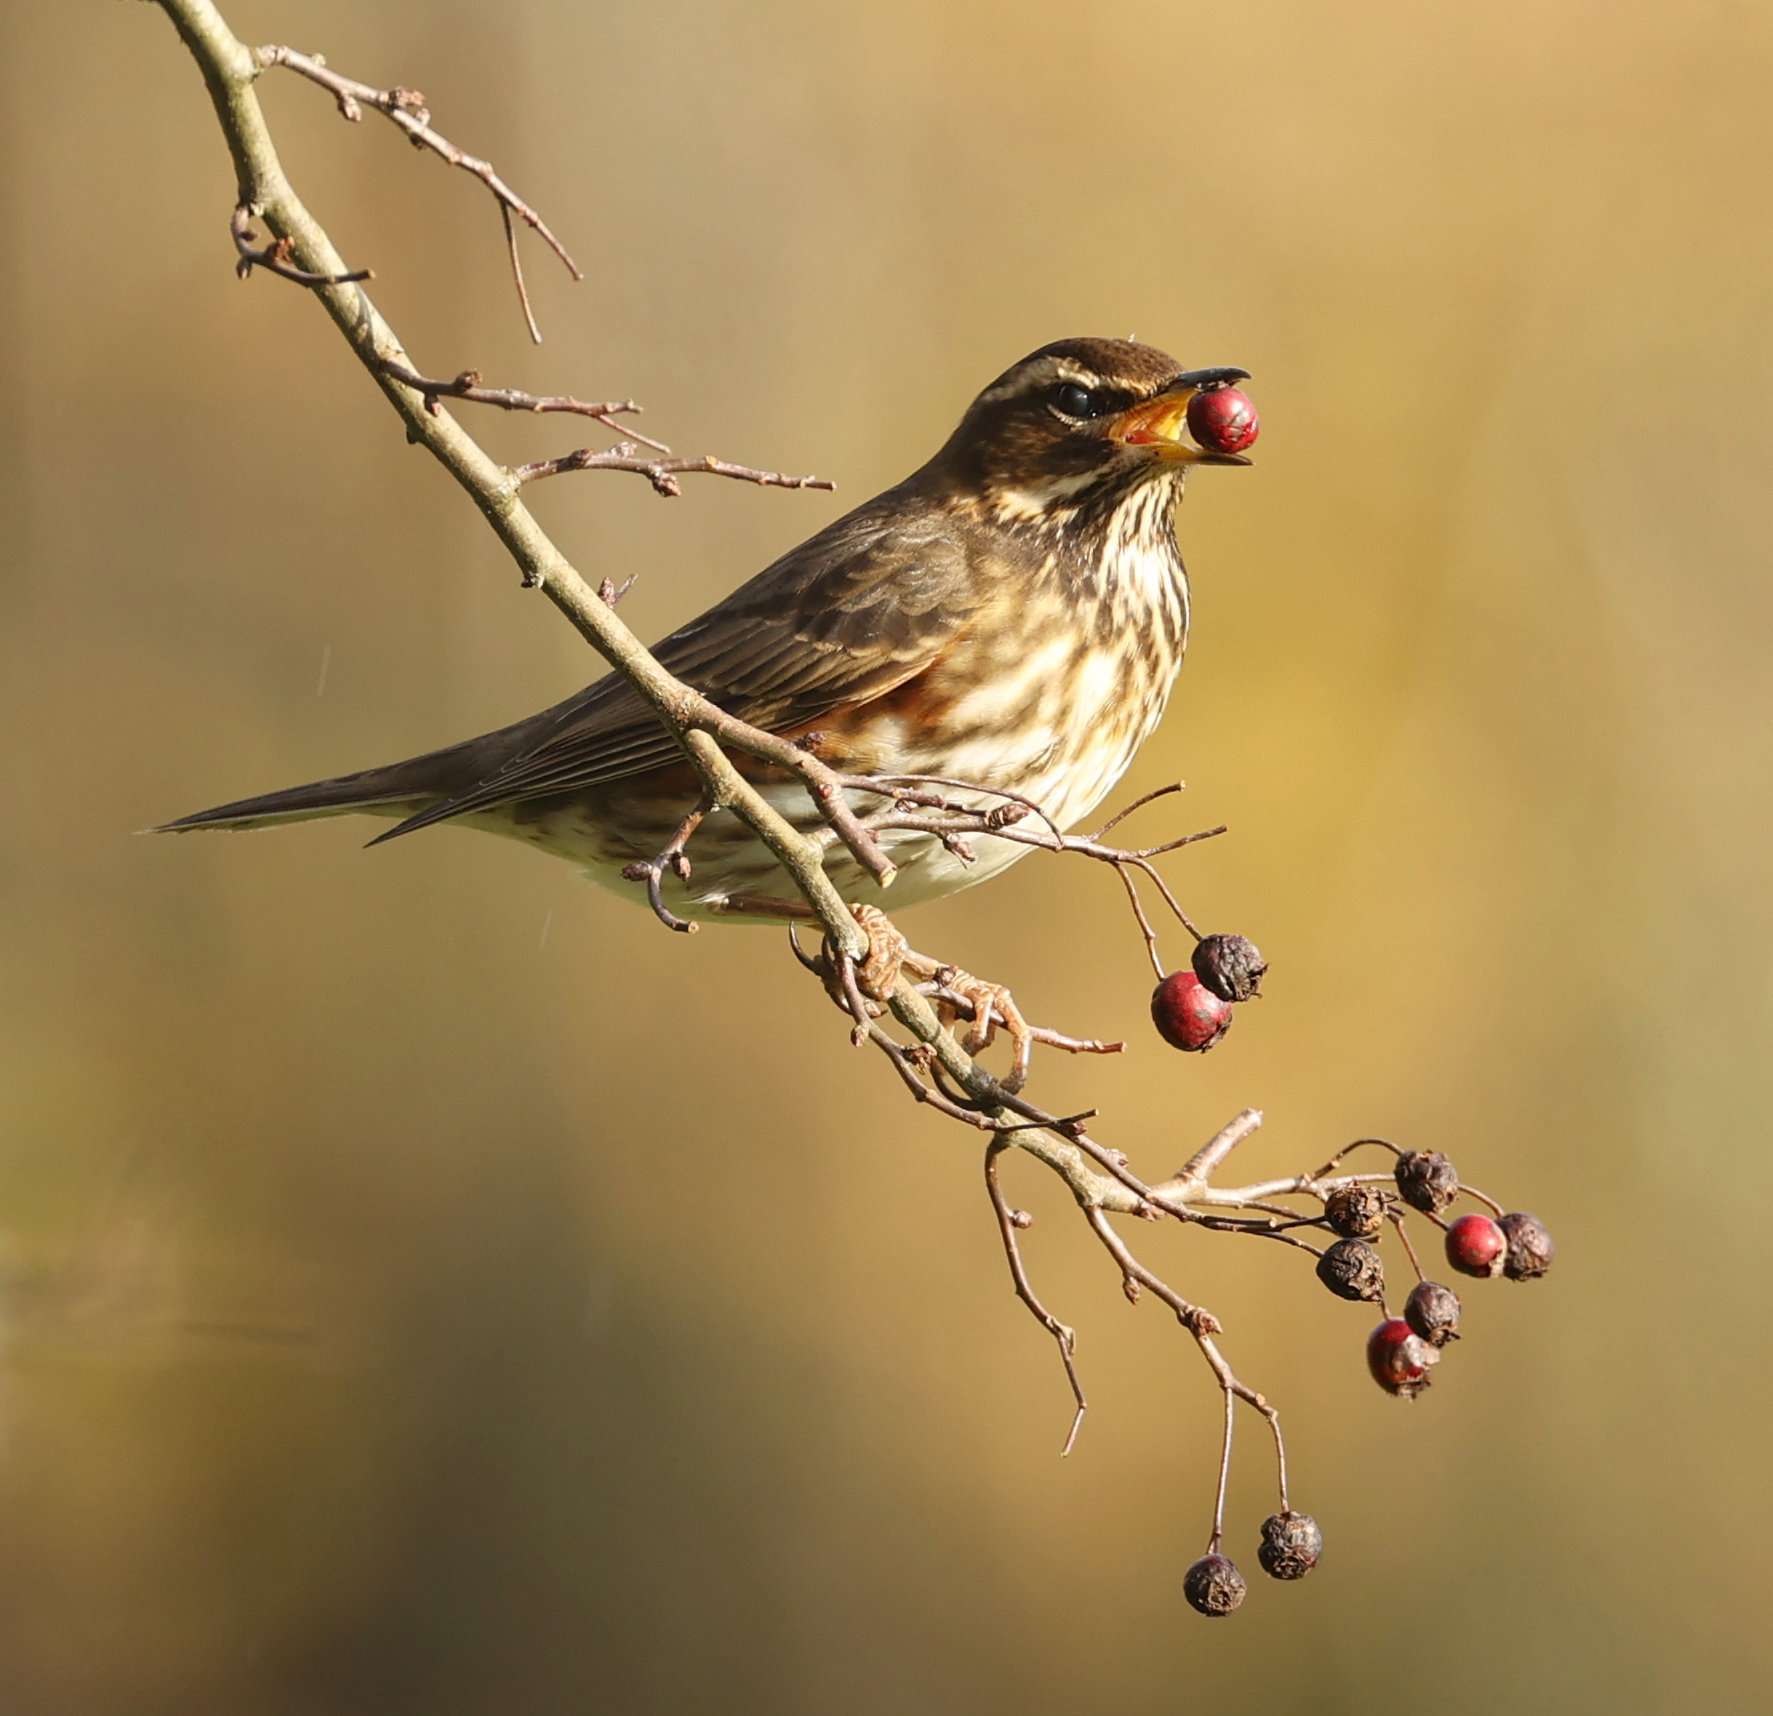 Redwing by Steve Hopper at South Brent